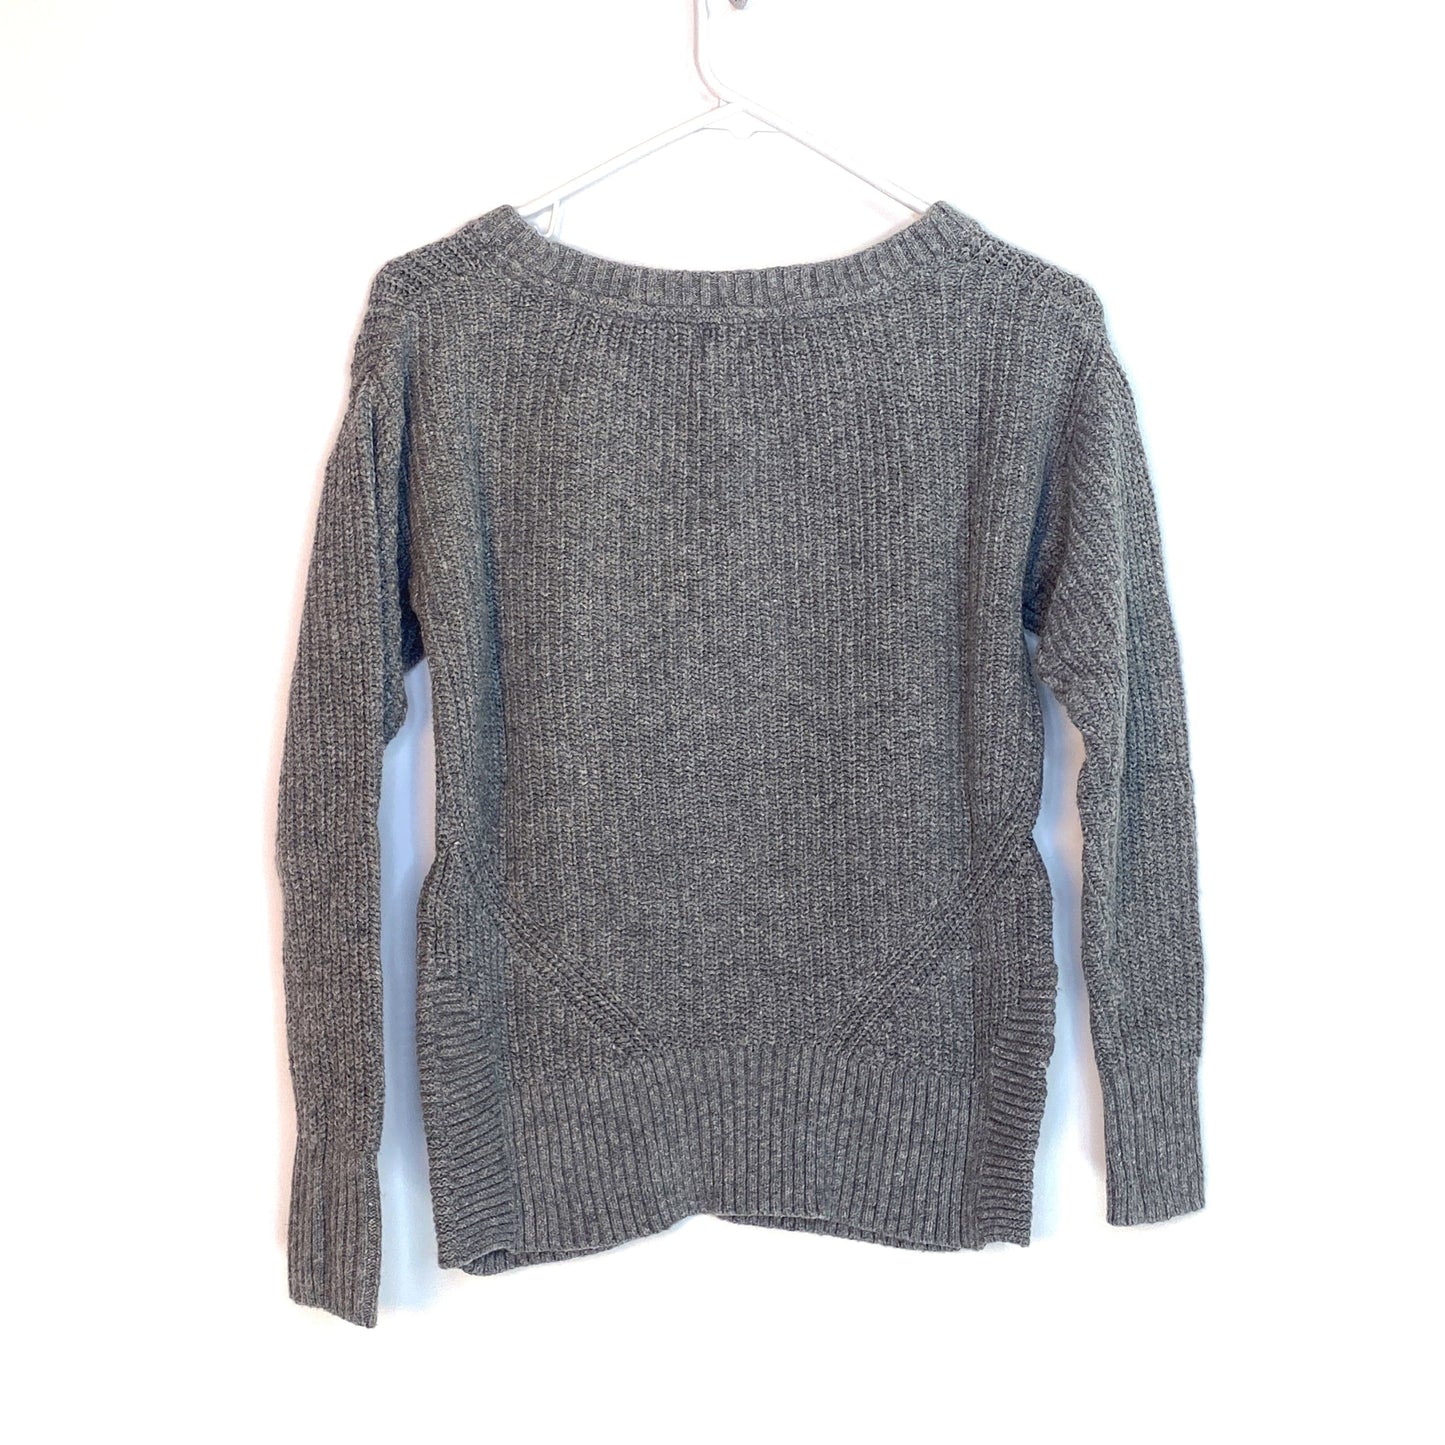 TOMS Womens Size L Gray Knitted Pullover Crewneck Sweater Slim L/s